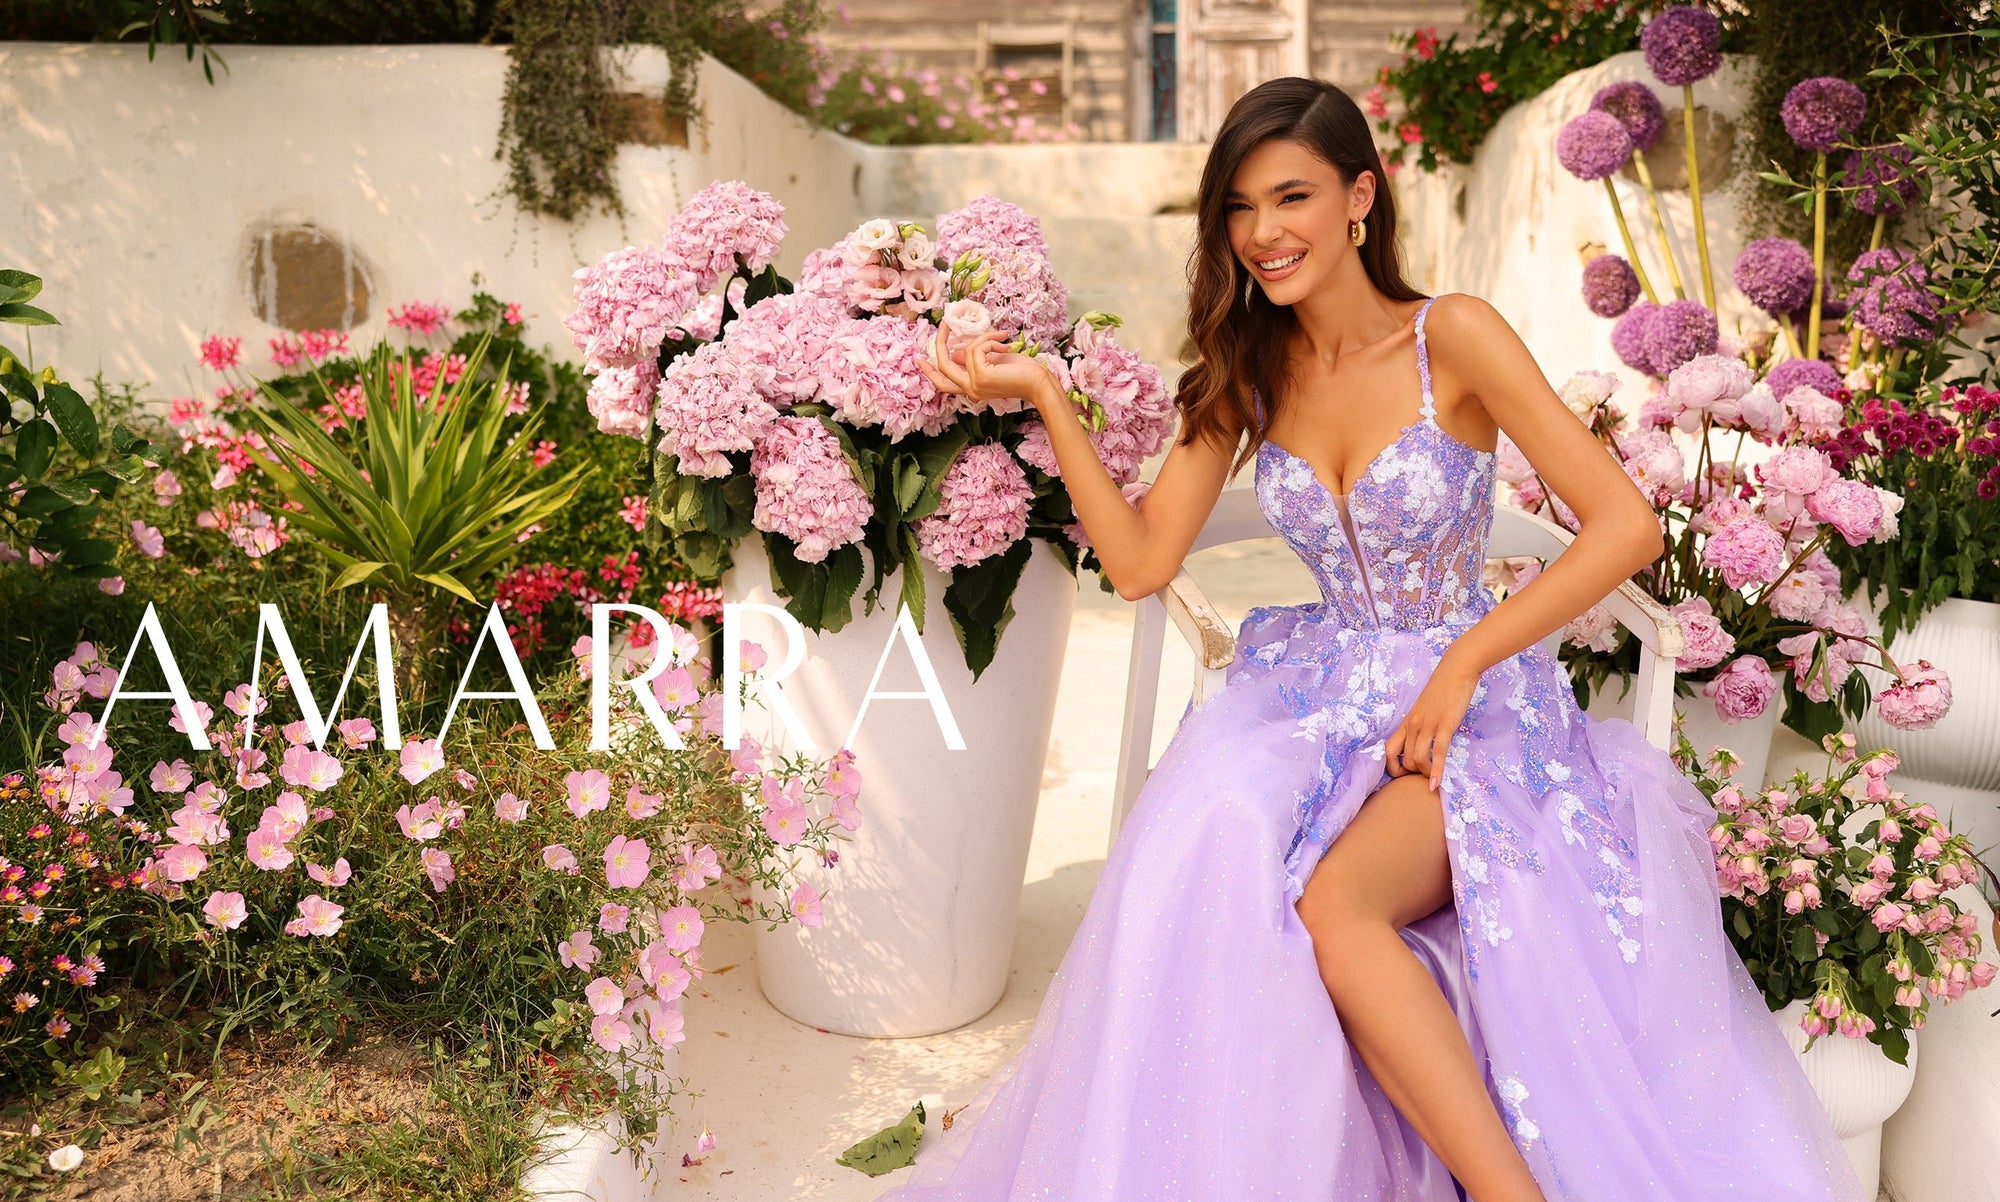 Tips on Shopping For Your Prom Dress